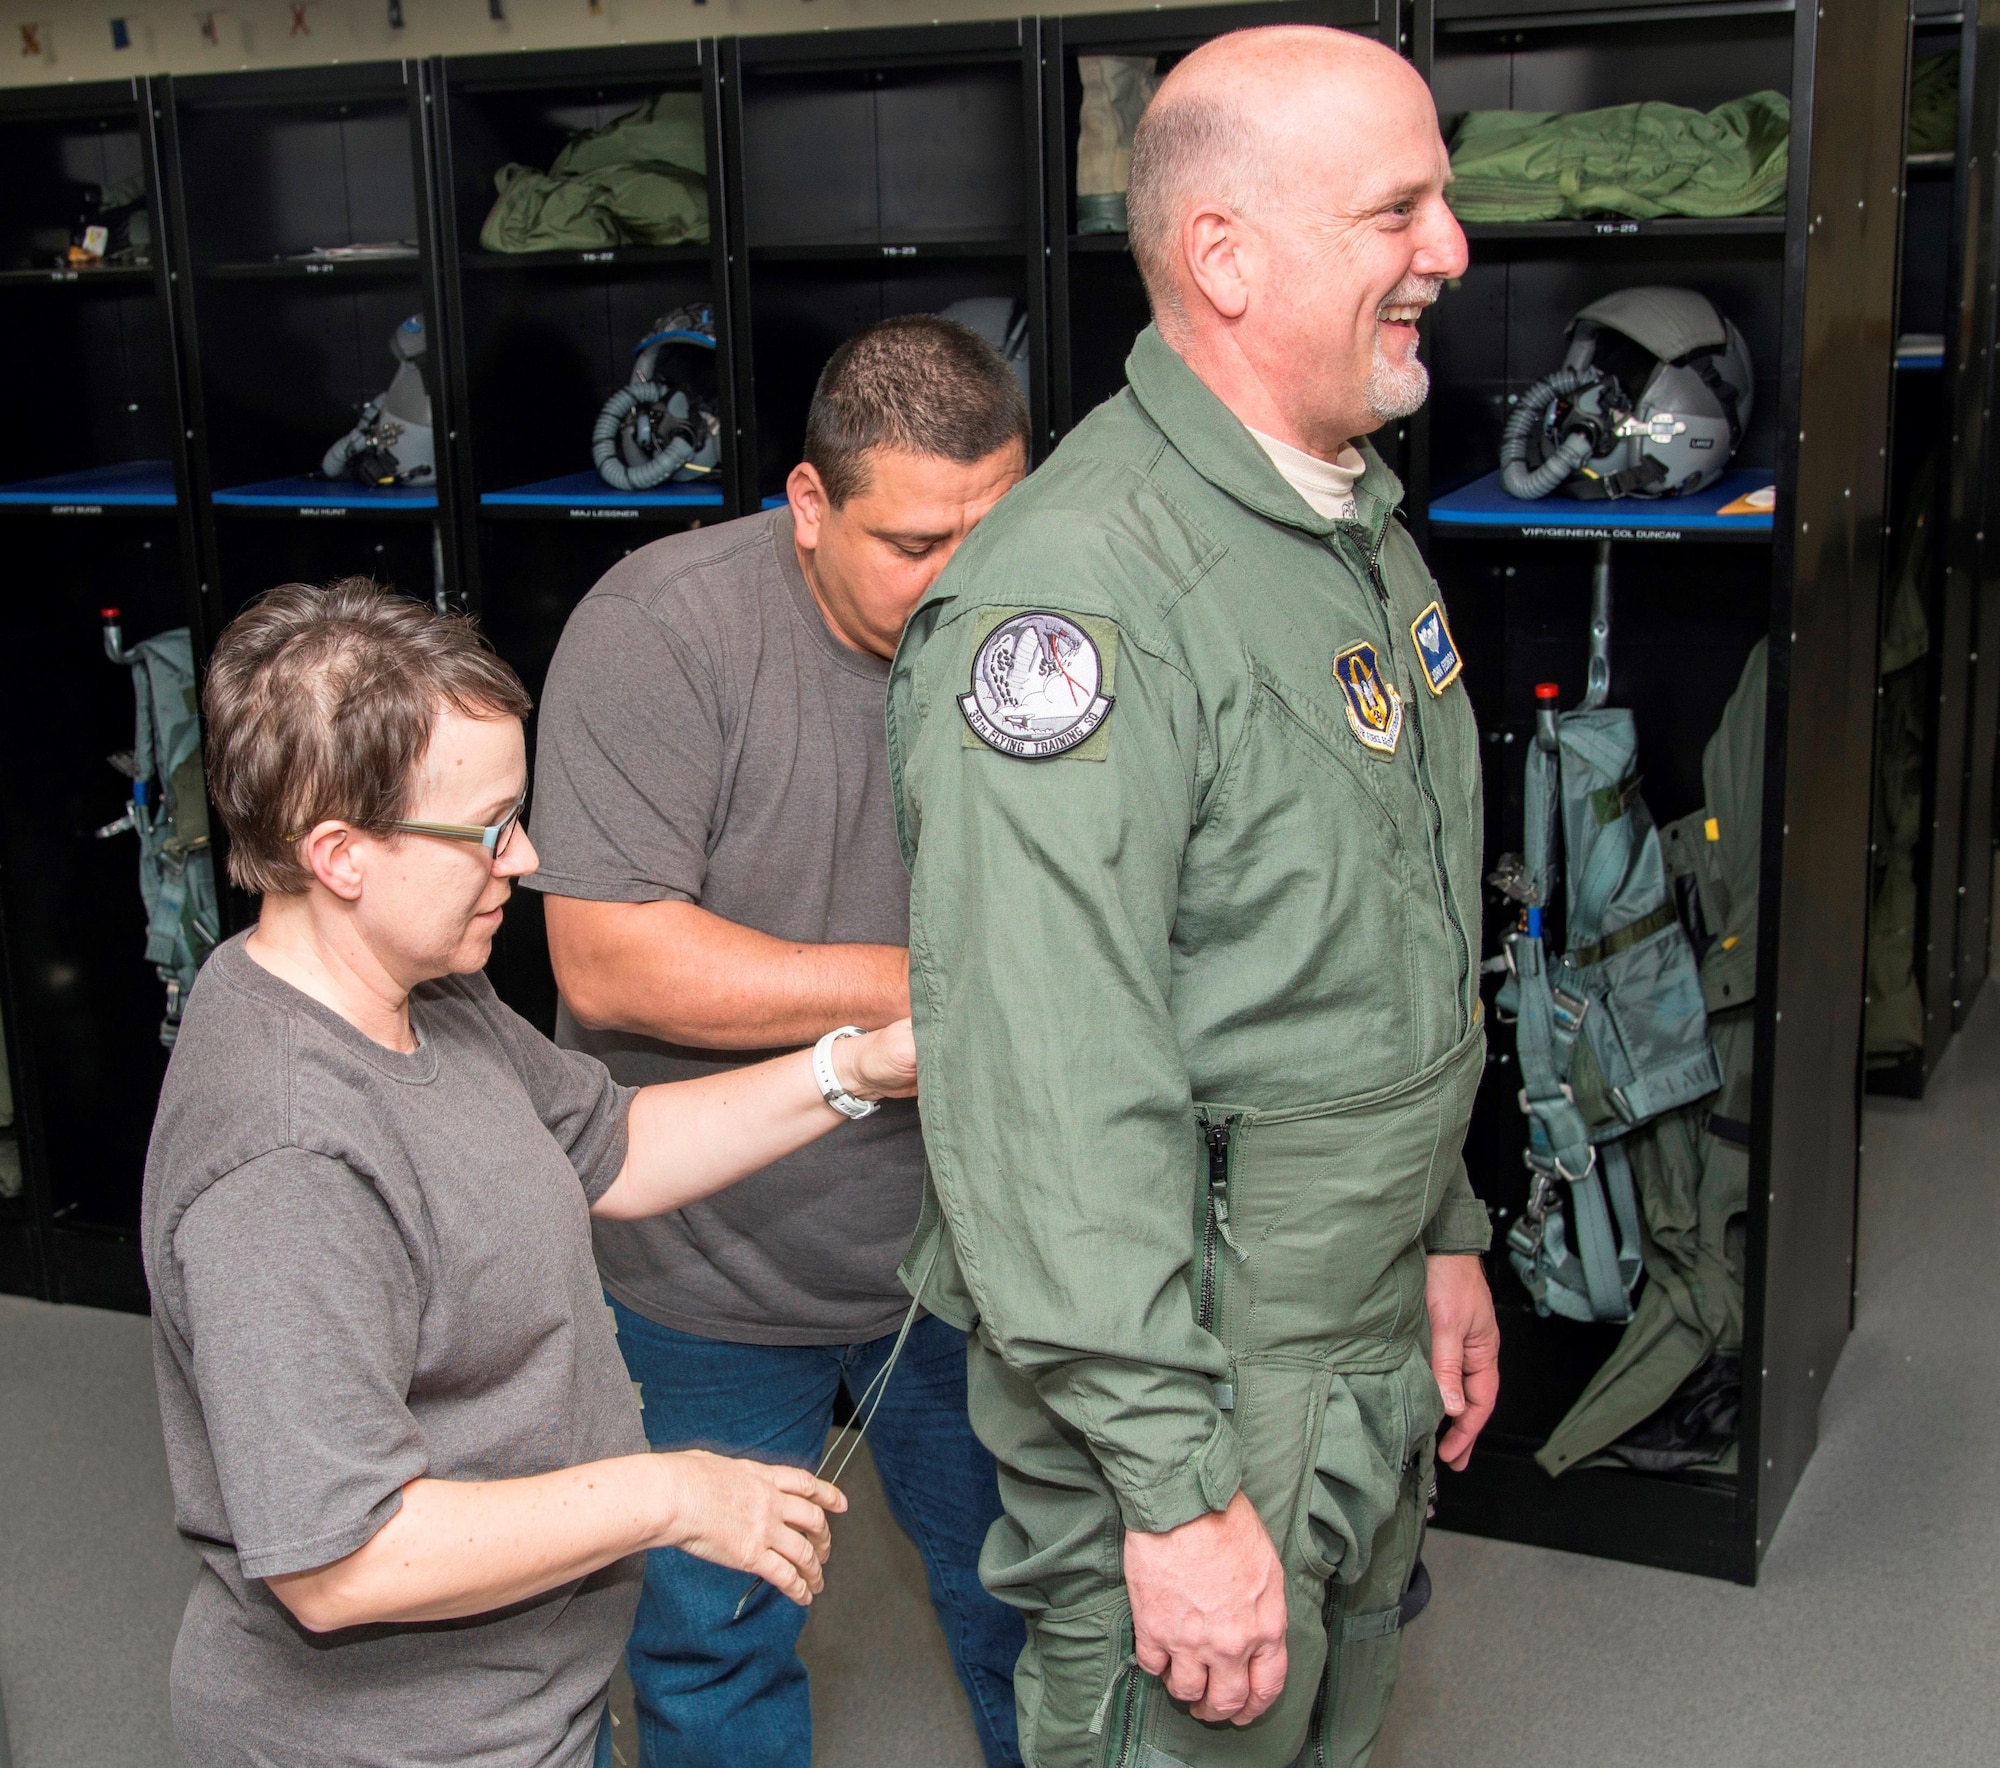 – April Fisher (L) and Eddie Scribner (C) flight equipment life support technicians with the 559 Flying Squadron at Joint Base San Antonio-Randolph, Texas, put the finishing touches on a G-suit for John Fedrico, deputy assistant Secretary of the Air Force for  Reserve Affairs and Airman Readiness in preparation for a T-6 orientation flight here Feb. 13. Fedrico’s visit, hosted by the 340 FTG, served a dual purpose. Fedrico presented a letter of thanks to one of the unit’s own, retired Air Force Lt. Col. Todd Ernst. Ernst was honored for his efforts to help ensure families of Reserve and Guard service members receive the same survivor benefits as active duty service members. Fedrico also received a mission brief and got to experience the unit’s operations first hand. (Air Force photo by Sean Worrell, Joint Base San Antonio-Randolph Public Affairs)